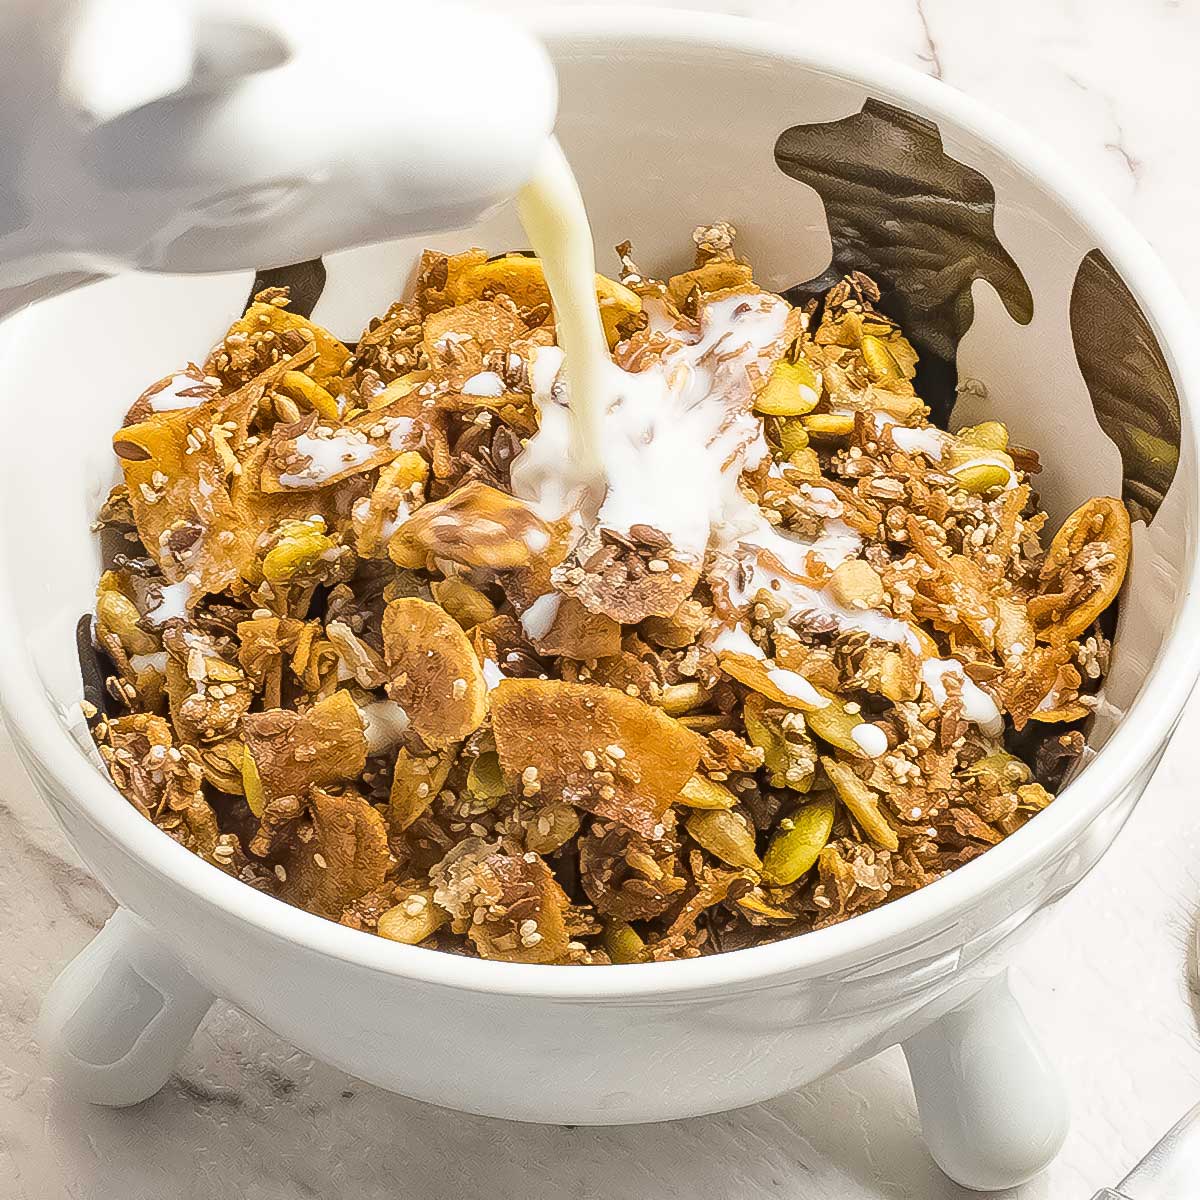 The best keto cereal recipe